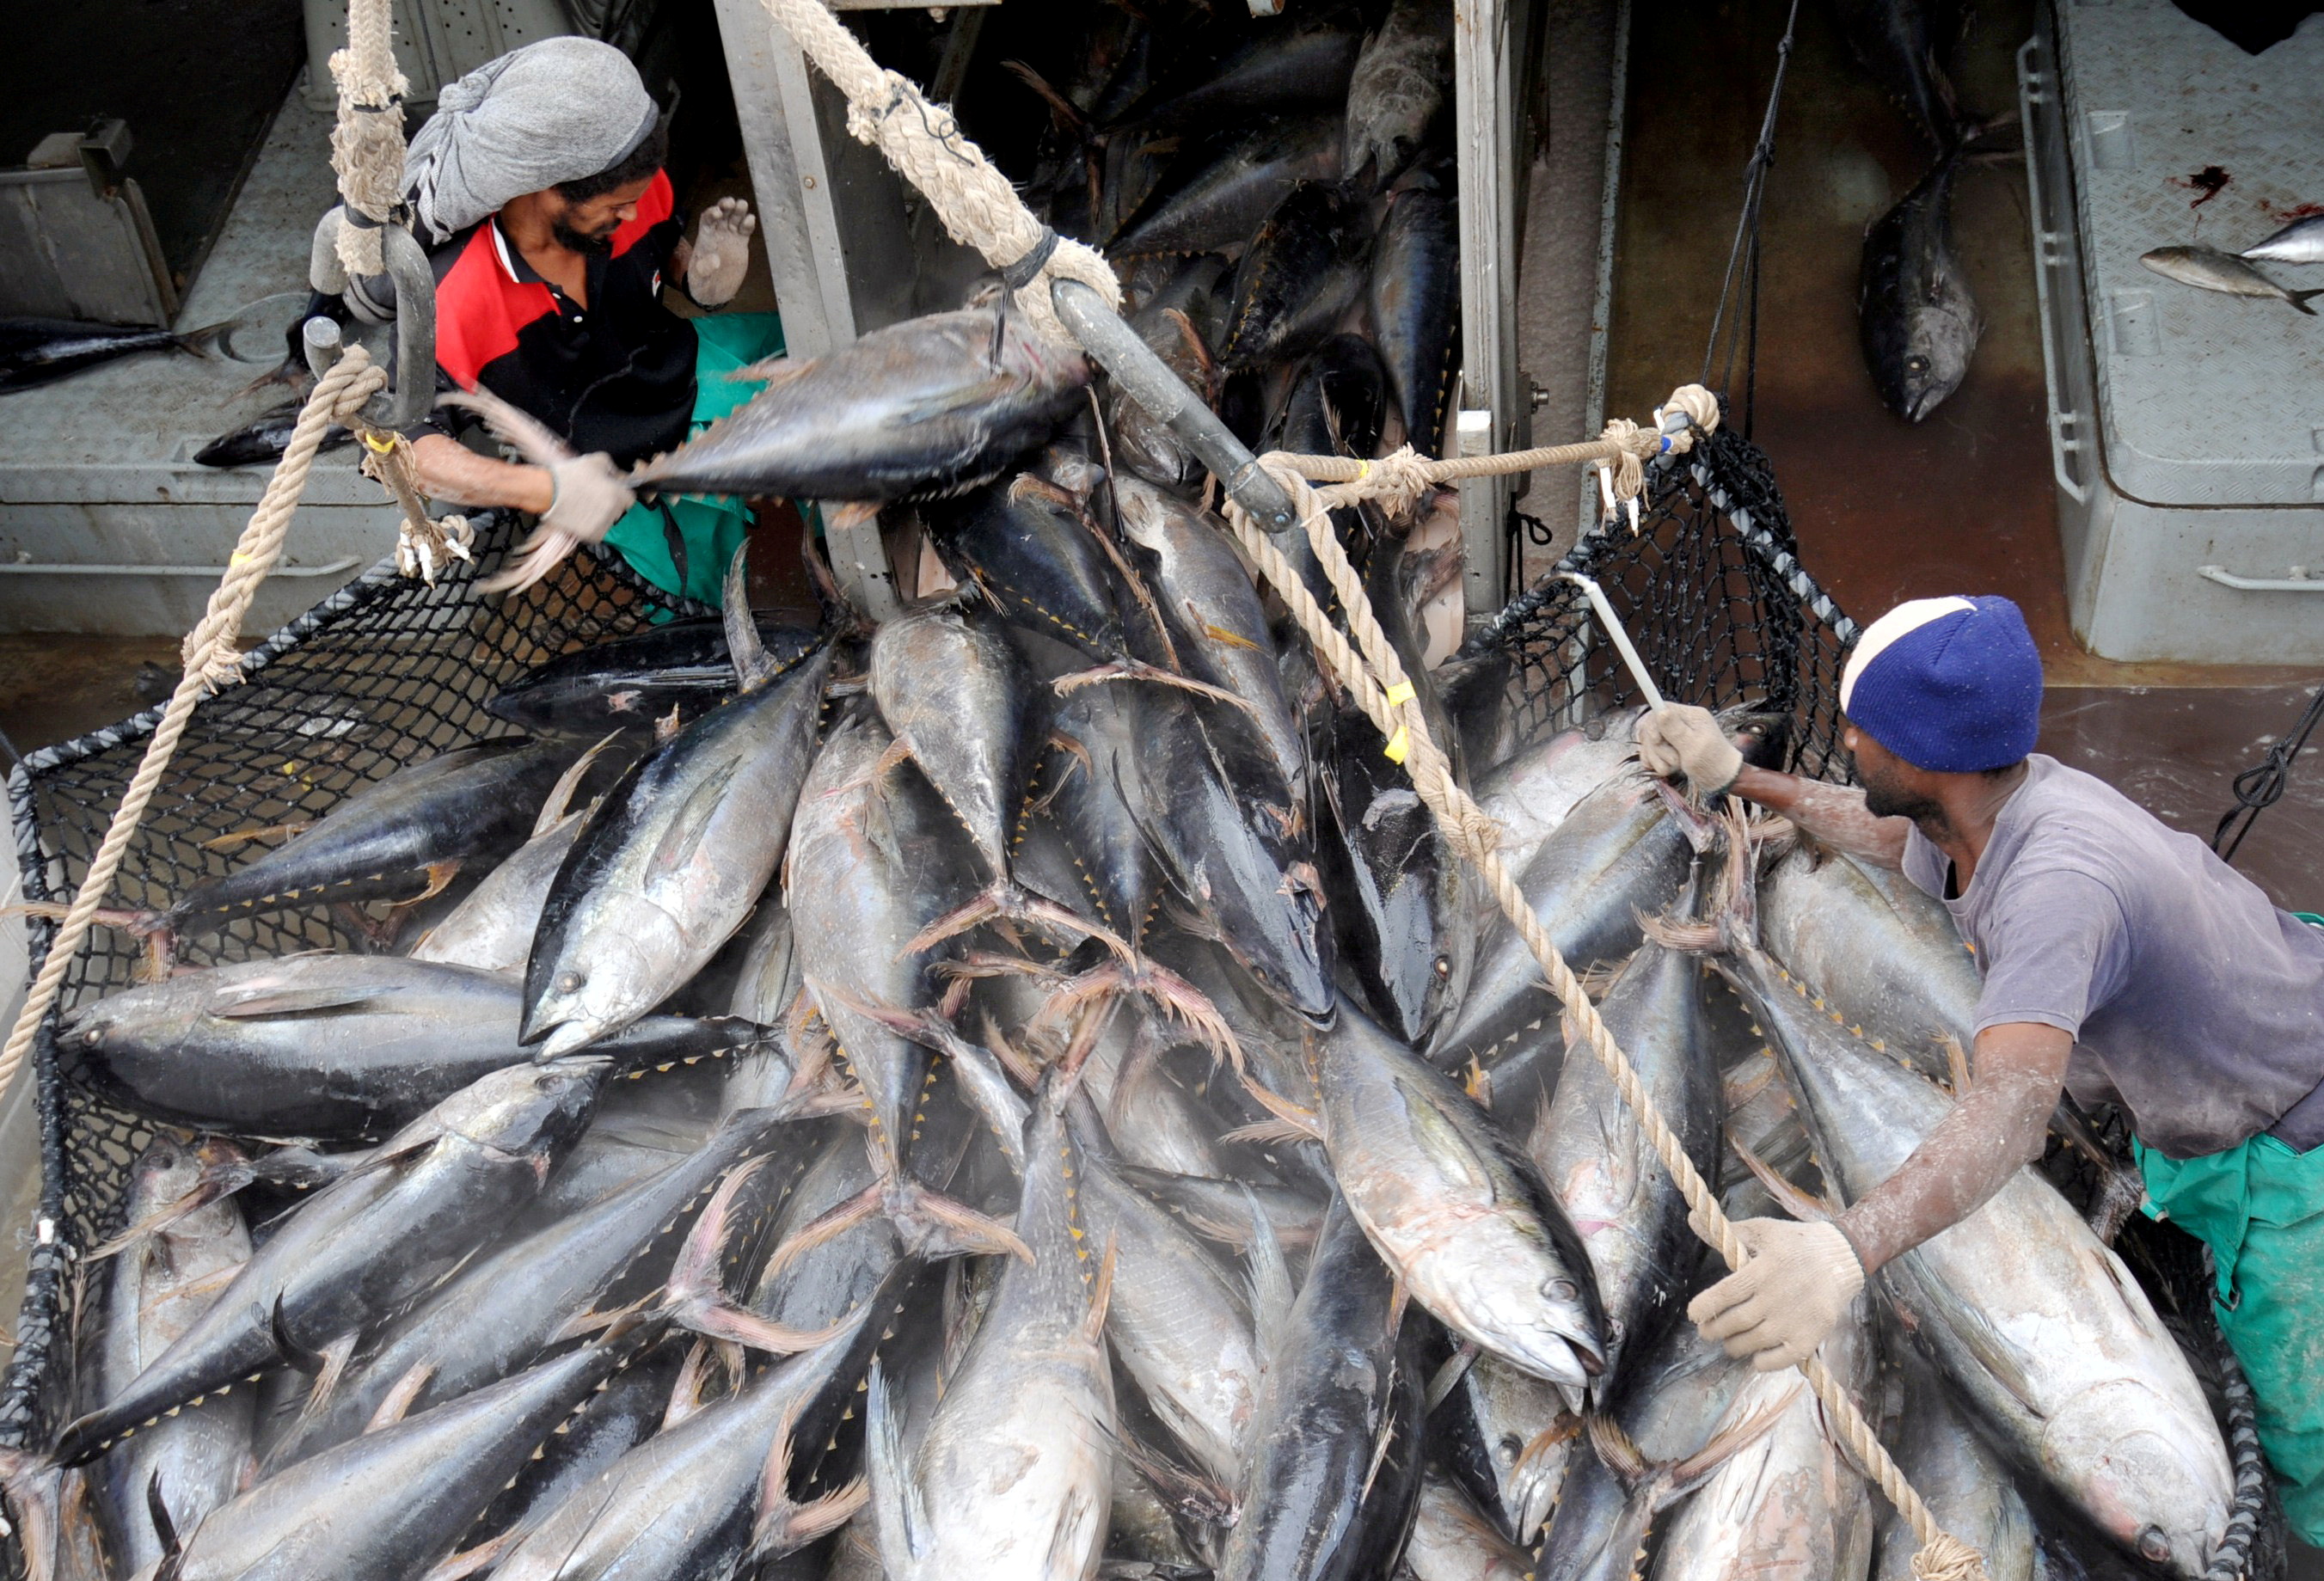 Workers offload tuna from a fishing boat in Port Victoria, August 4,